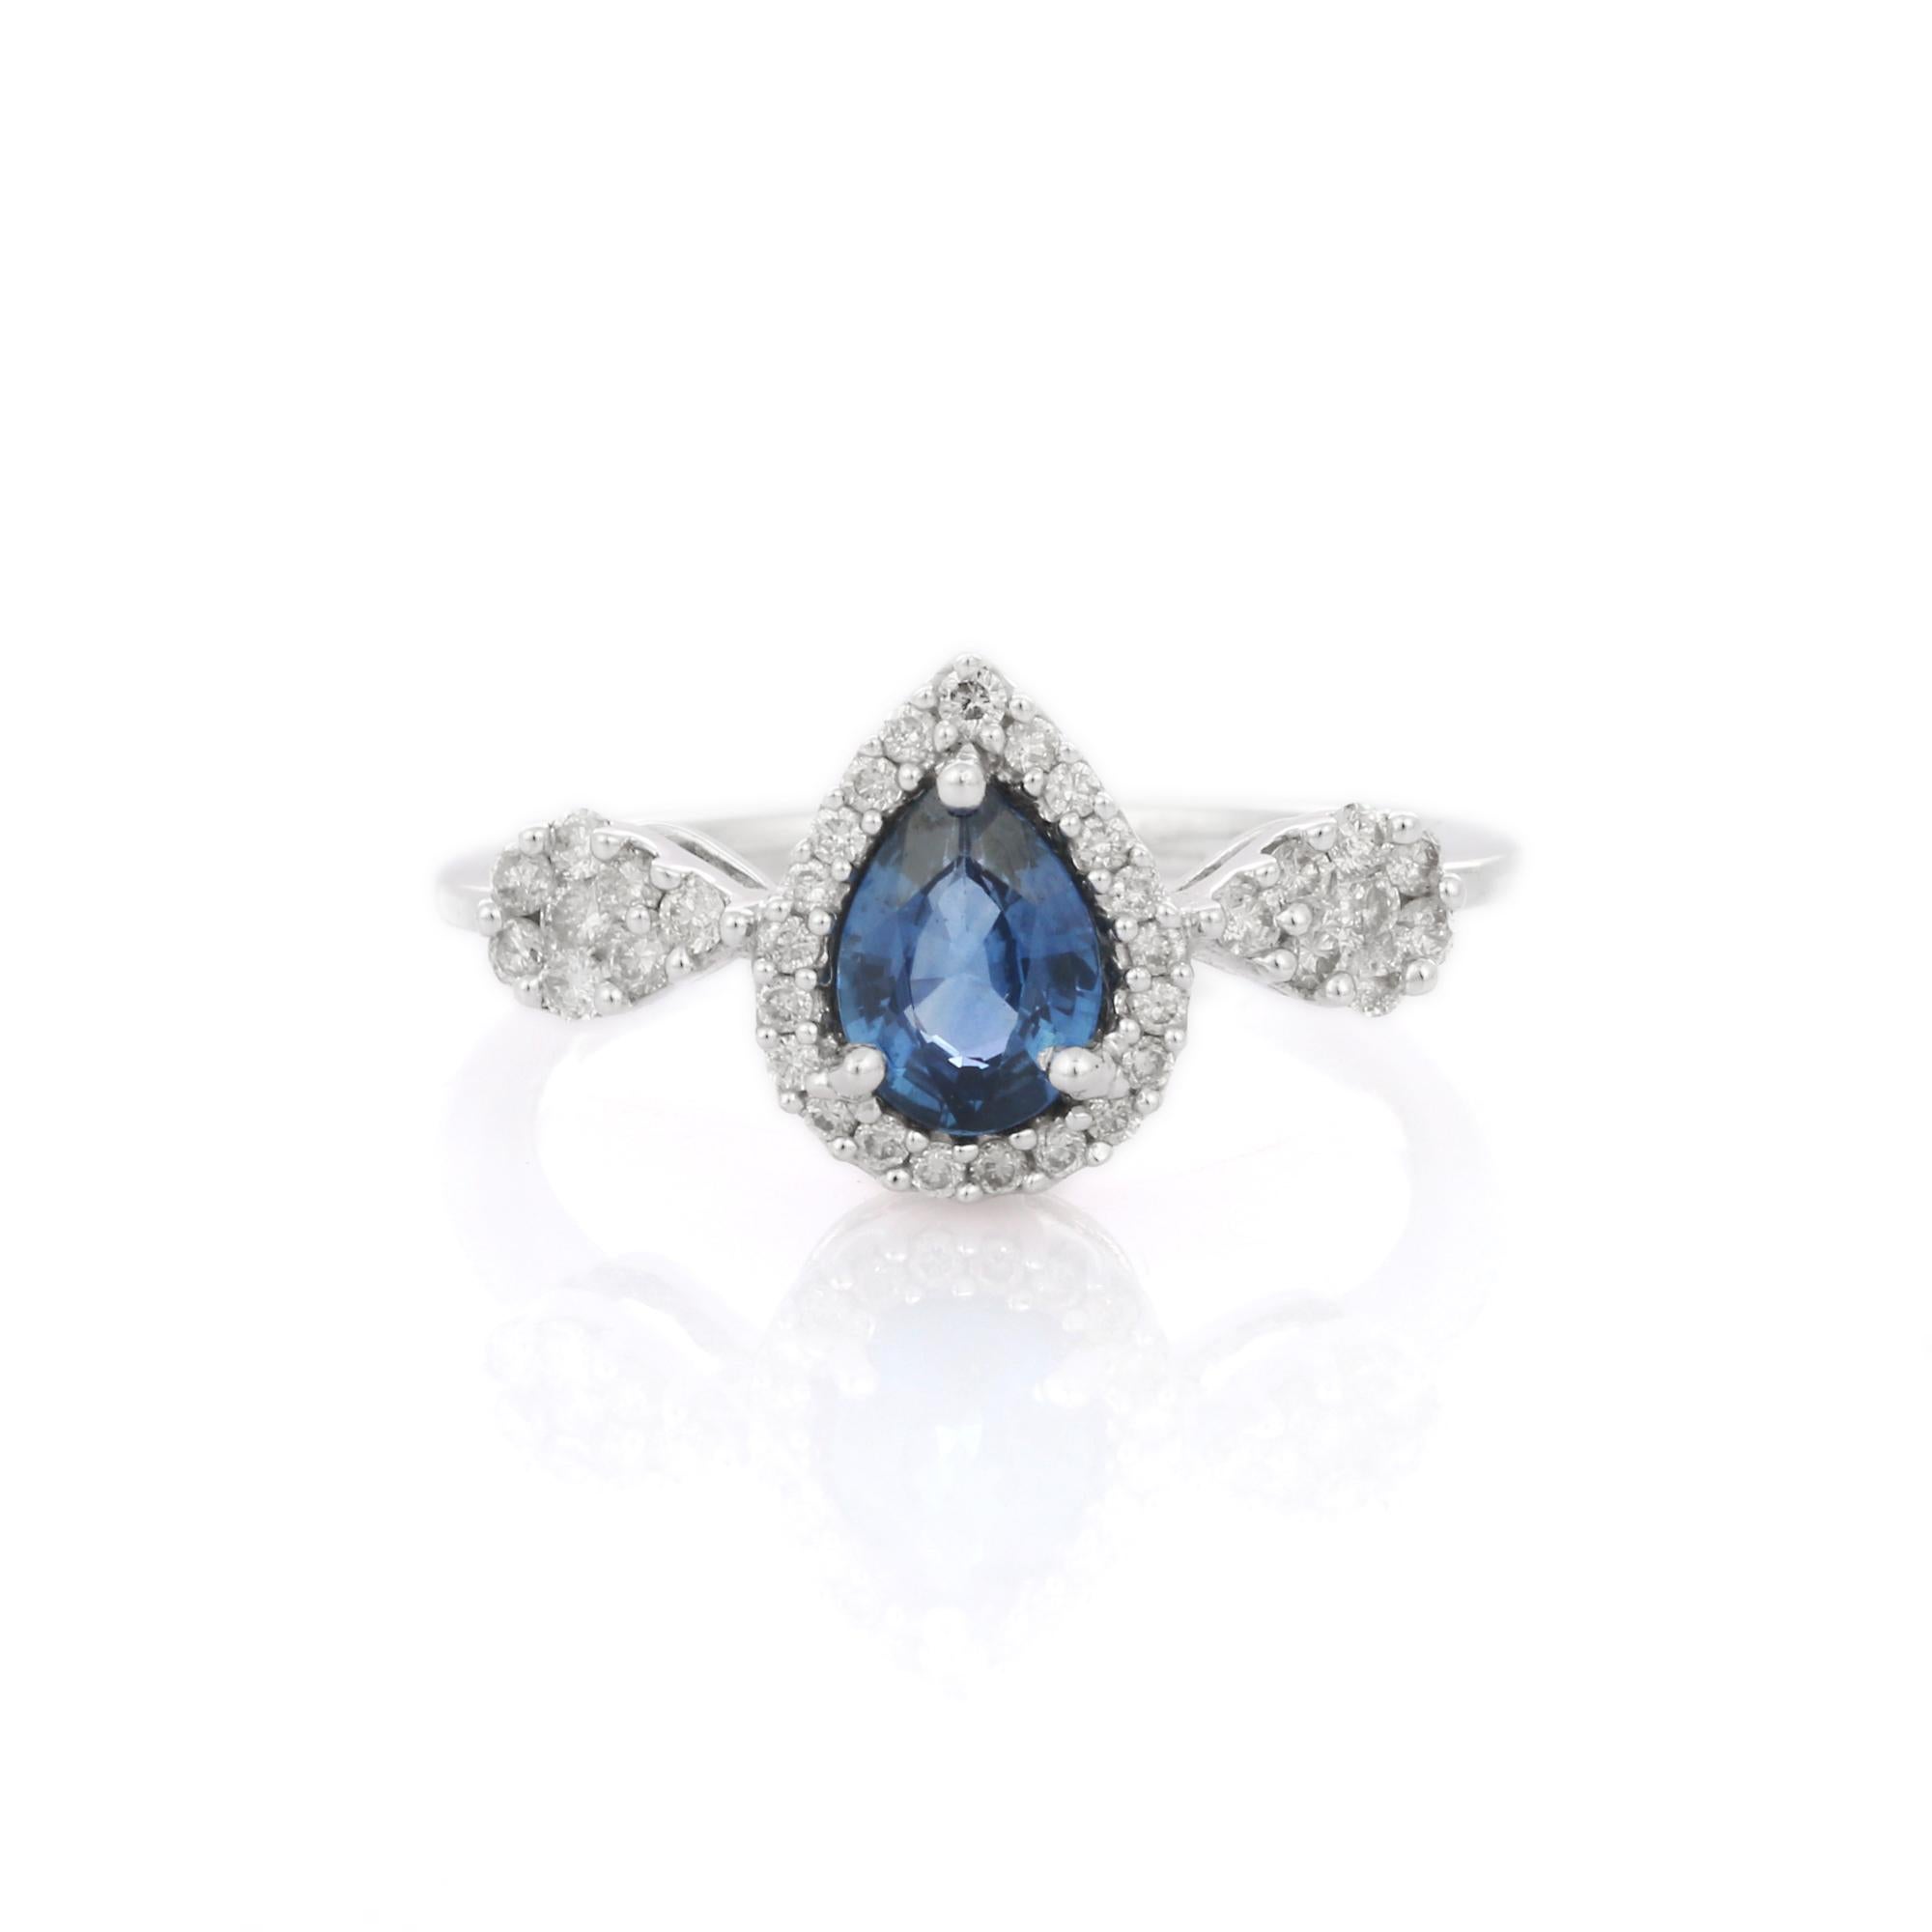 For Sale:  Blue Sapphire Engagement Ring, Ringed with Diamonds in 18K White Gold  2